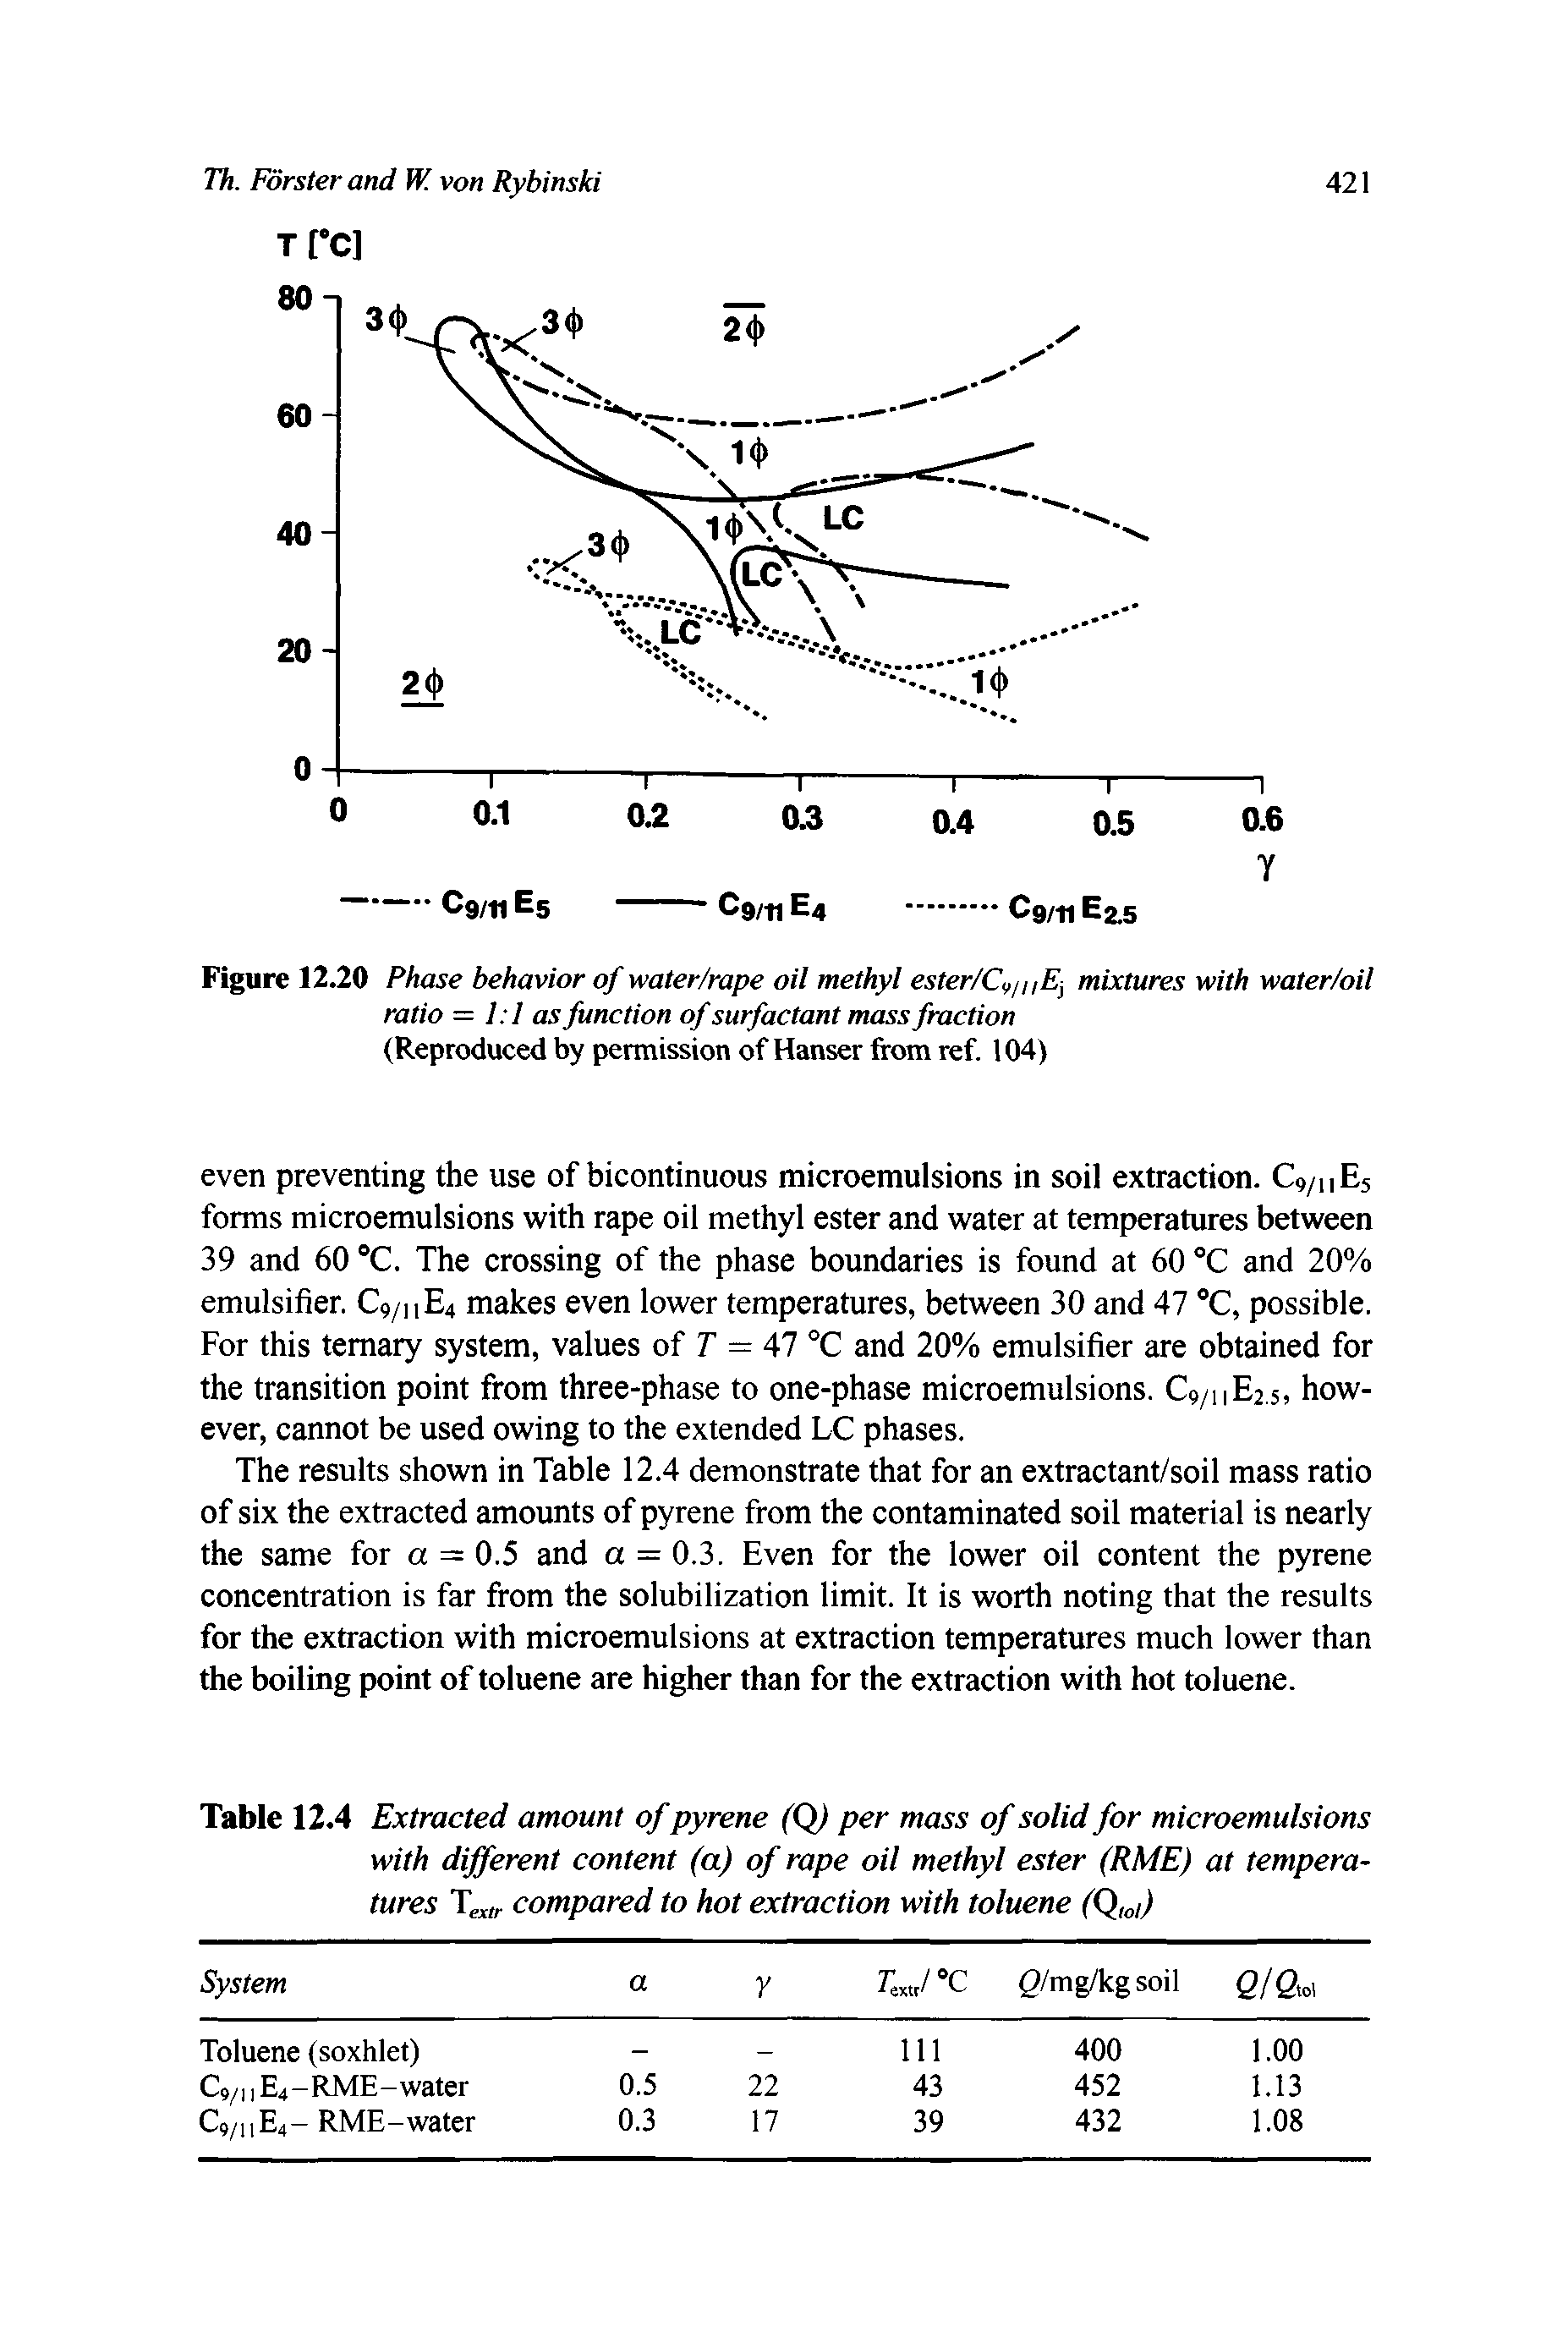 Figure 12 0 Phase behavior of water/rape oil methyl ester/C nEj mixtures with water/oil ratio = 1 1 as function of surfactant mass fraction (Reproduced by permission of Hanser from ref. 104)...